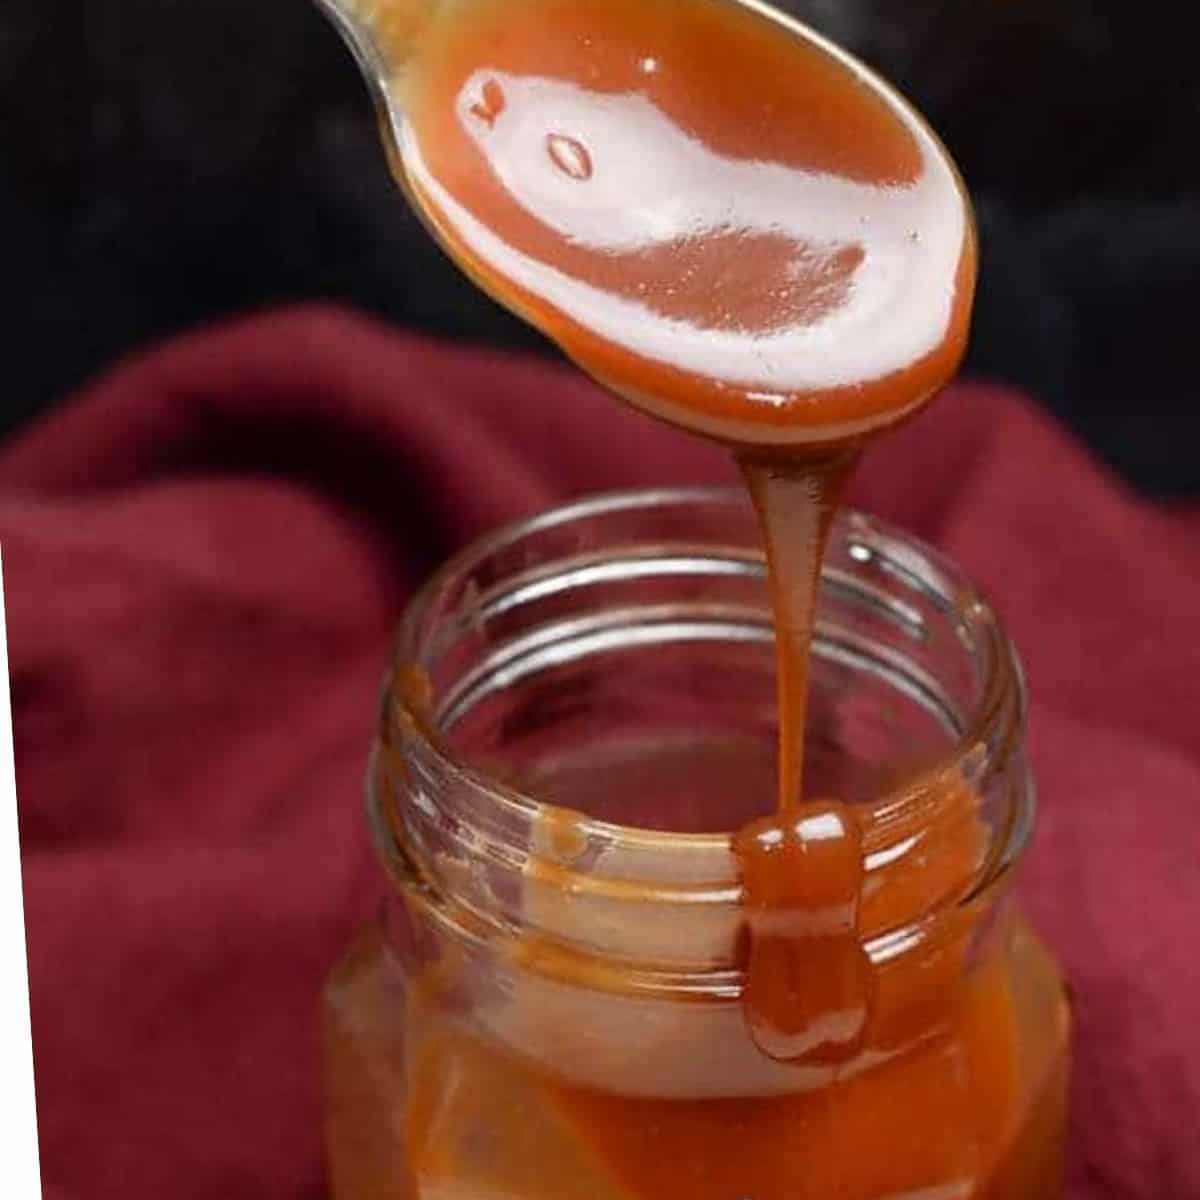 homemade brown butter caramel sauce. Perfect for your next bowl of ice cream.